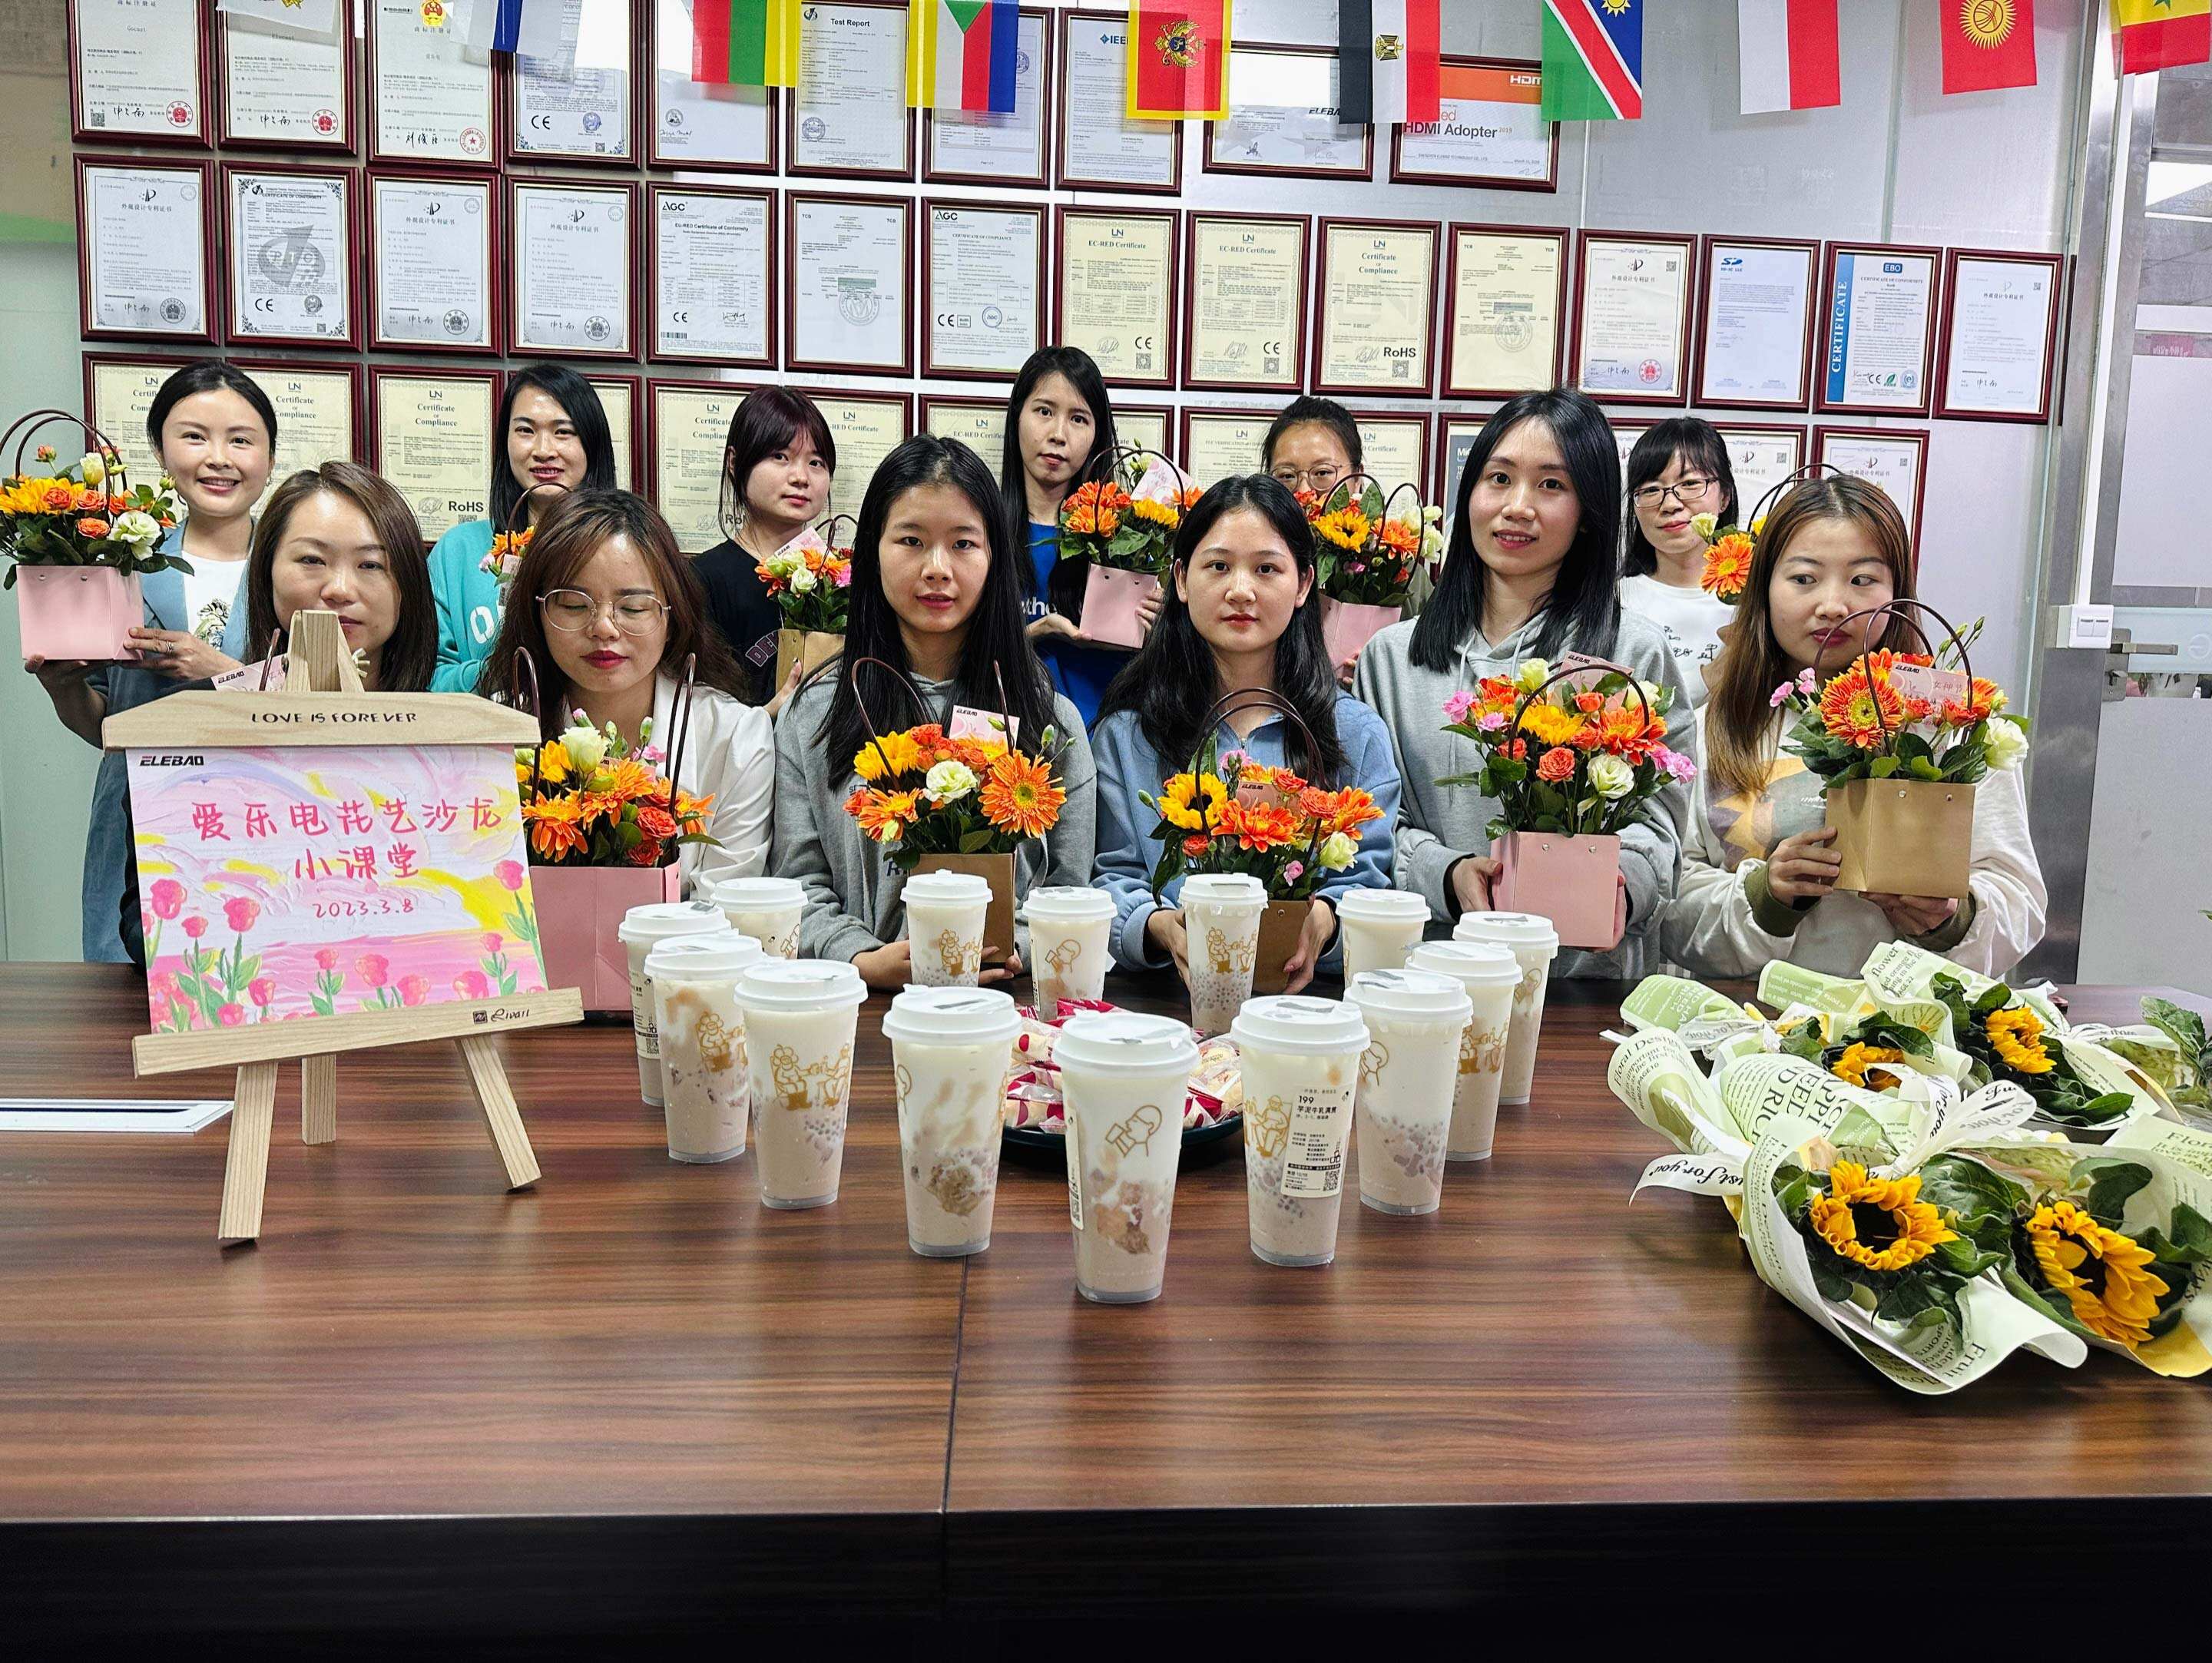 Elebao held a special flower arrangement event on March 8th to celebrate this significant day for International Women's Day